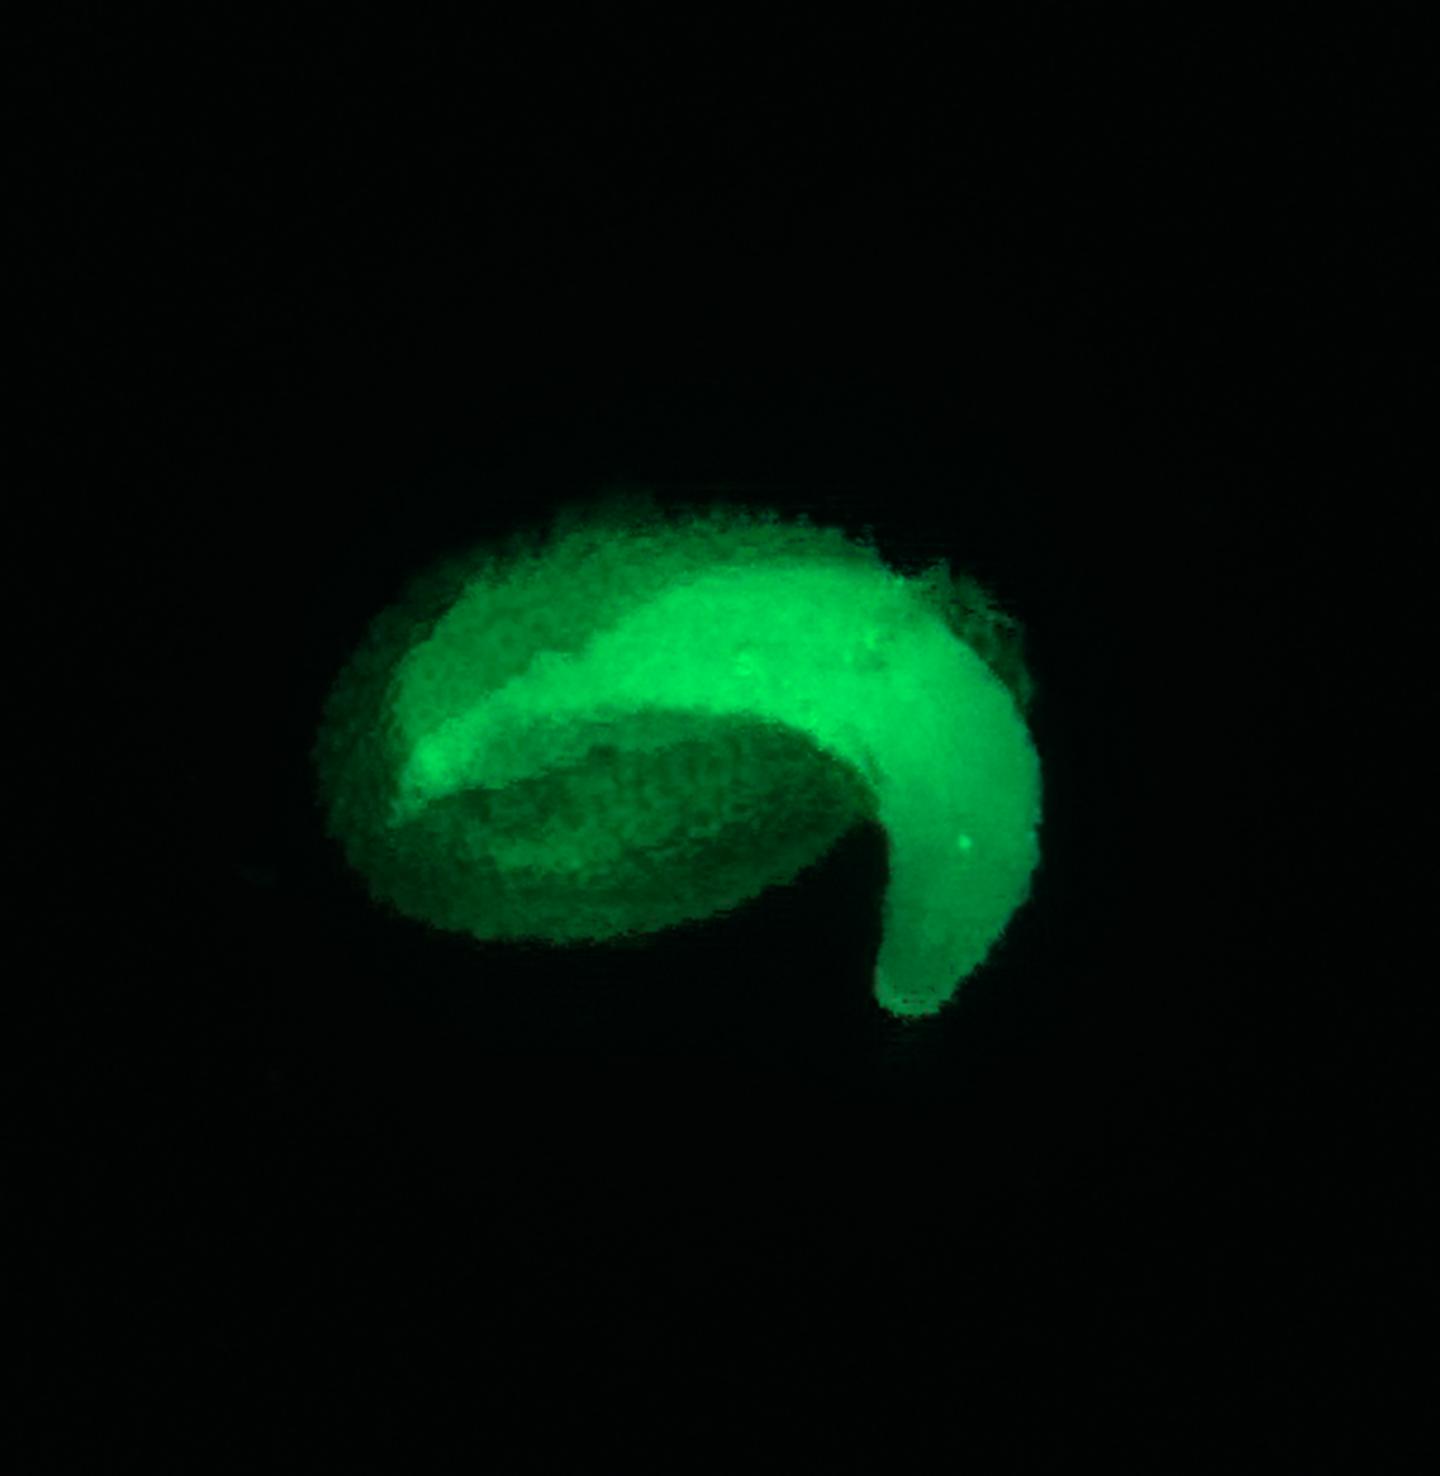 Seed Germination Under the Fluorescence Microscope